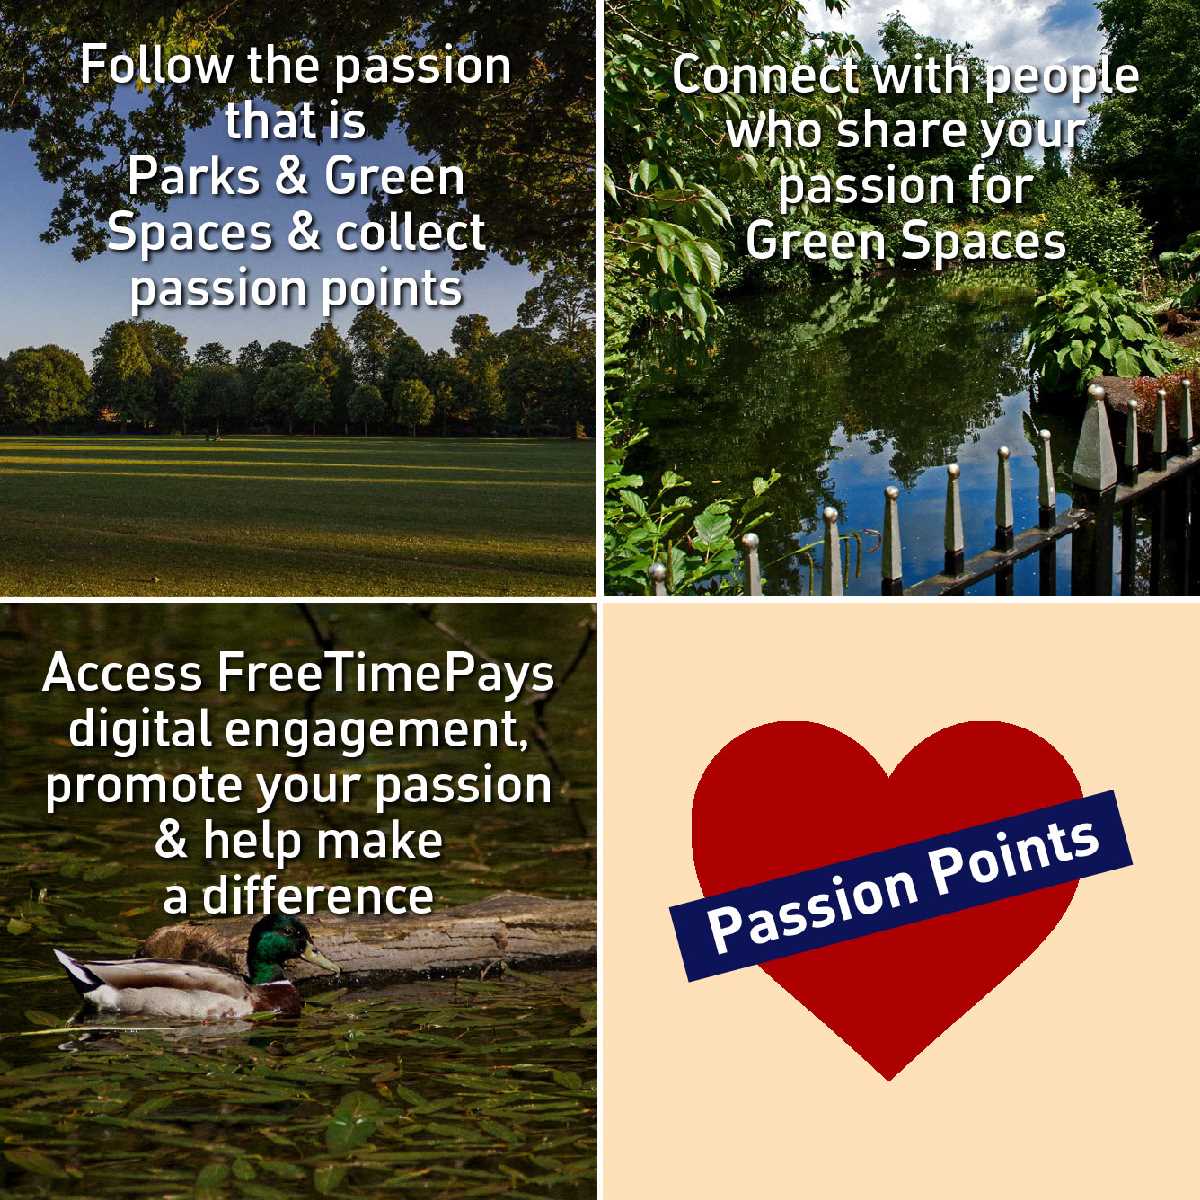 Are you passionate about protecting Green Spaces? Join Us!